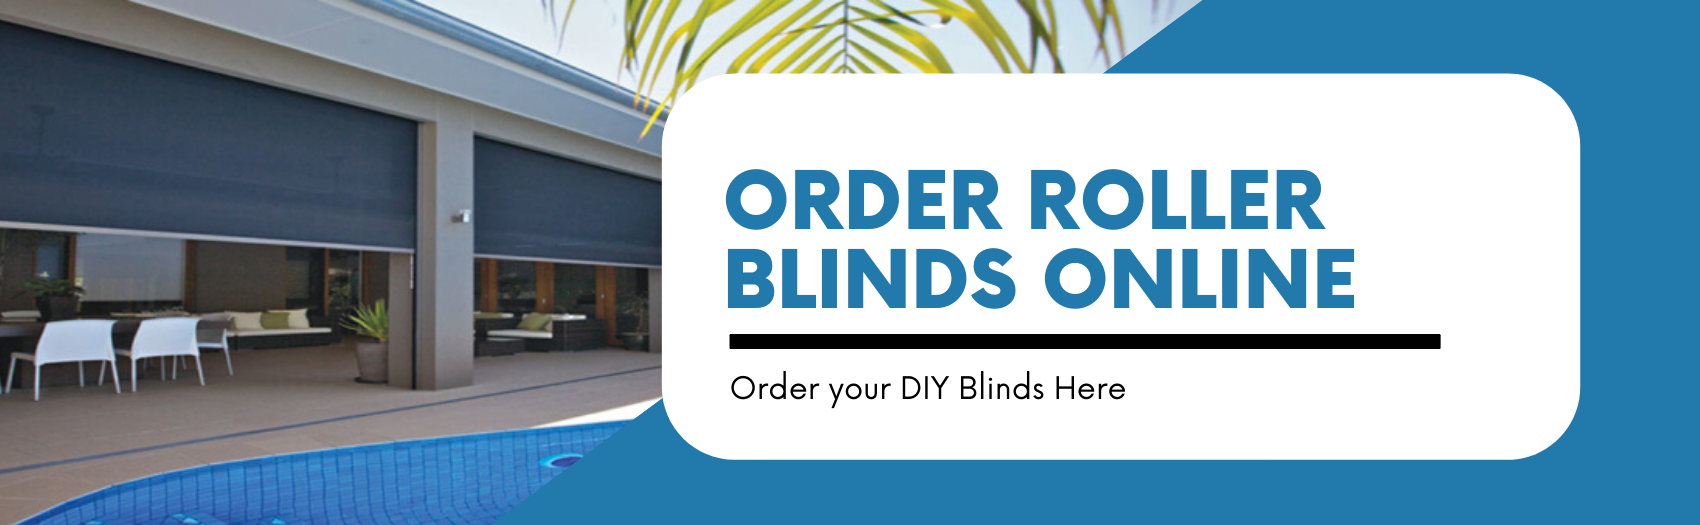 order blinds online image of external blinds and pool area